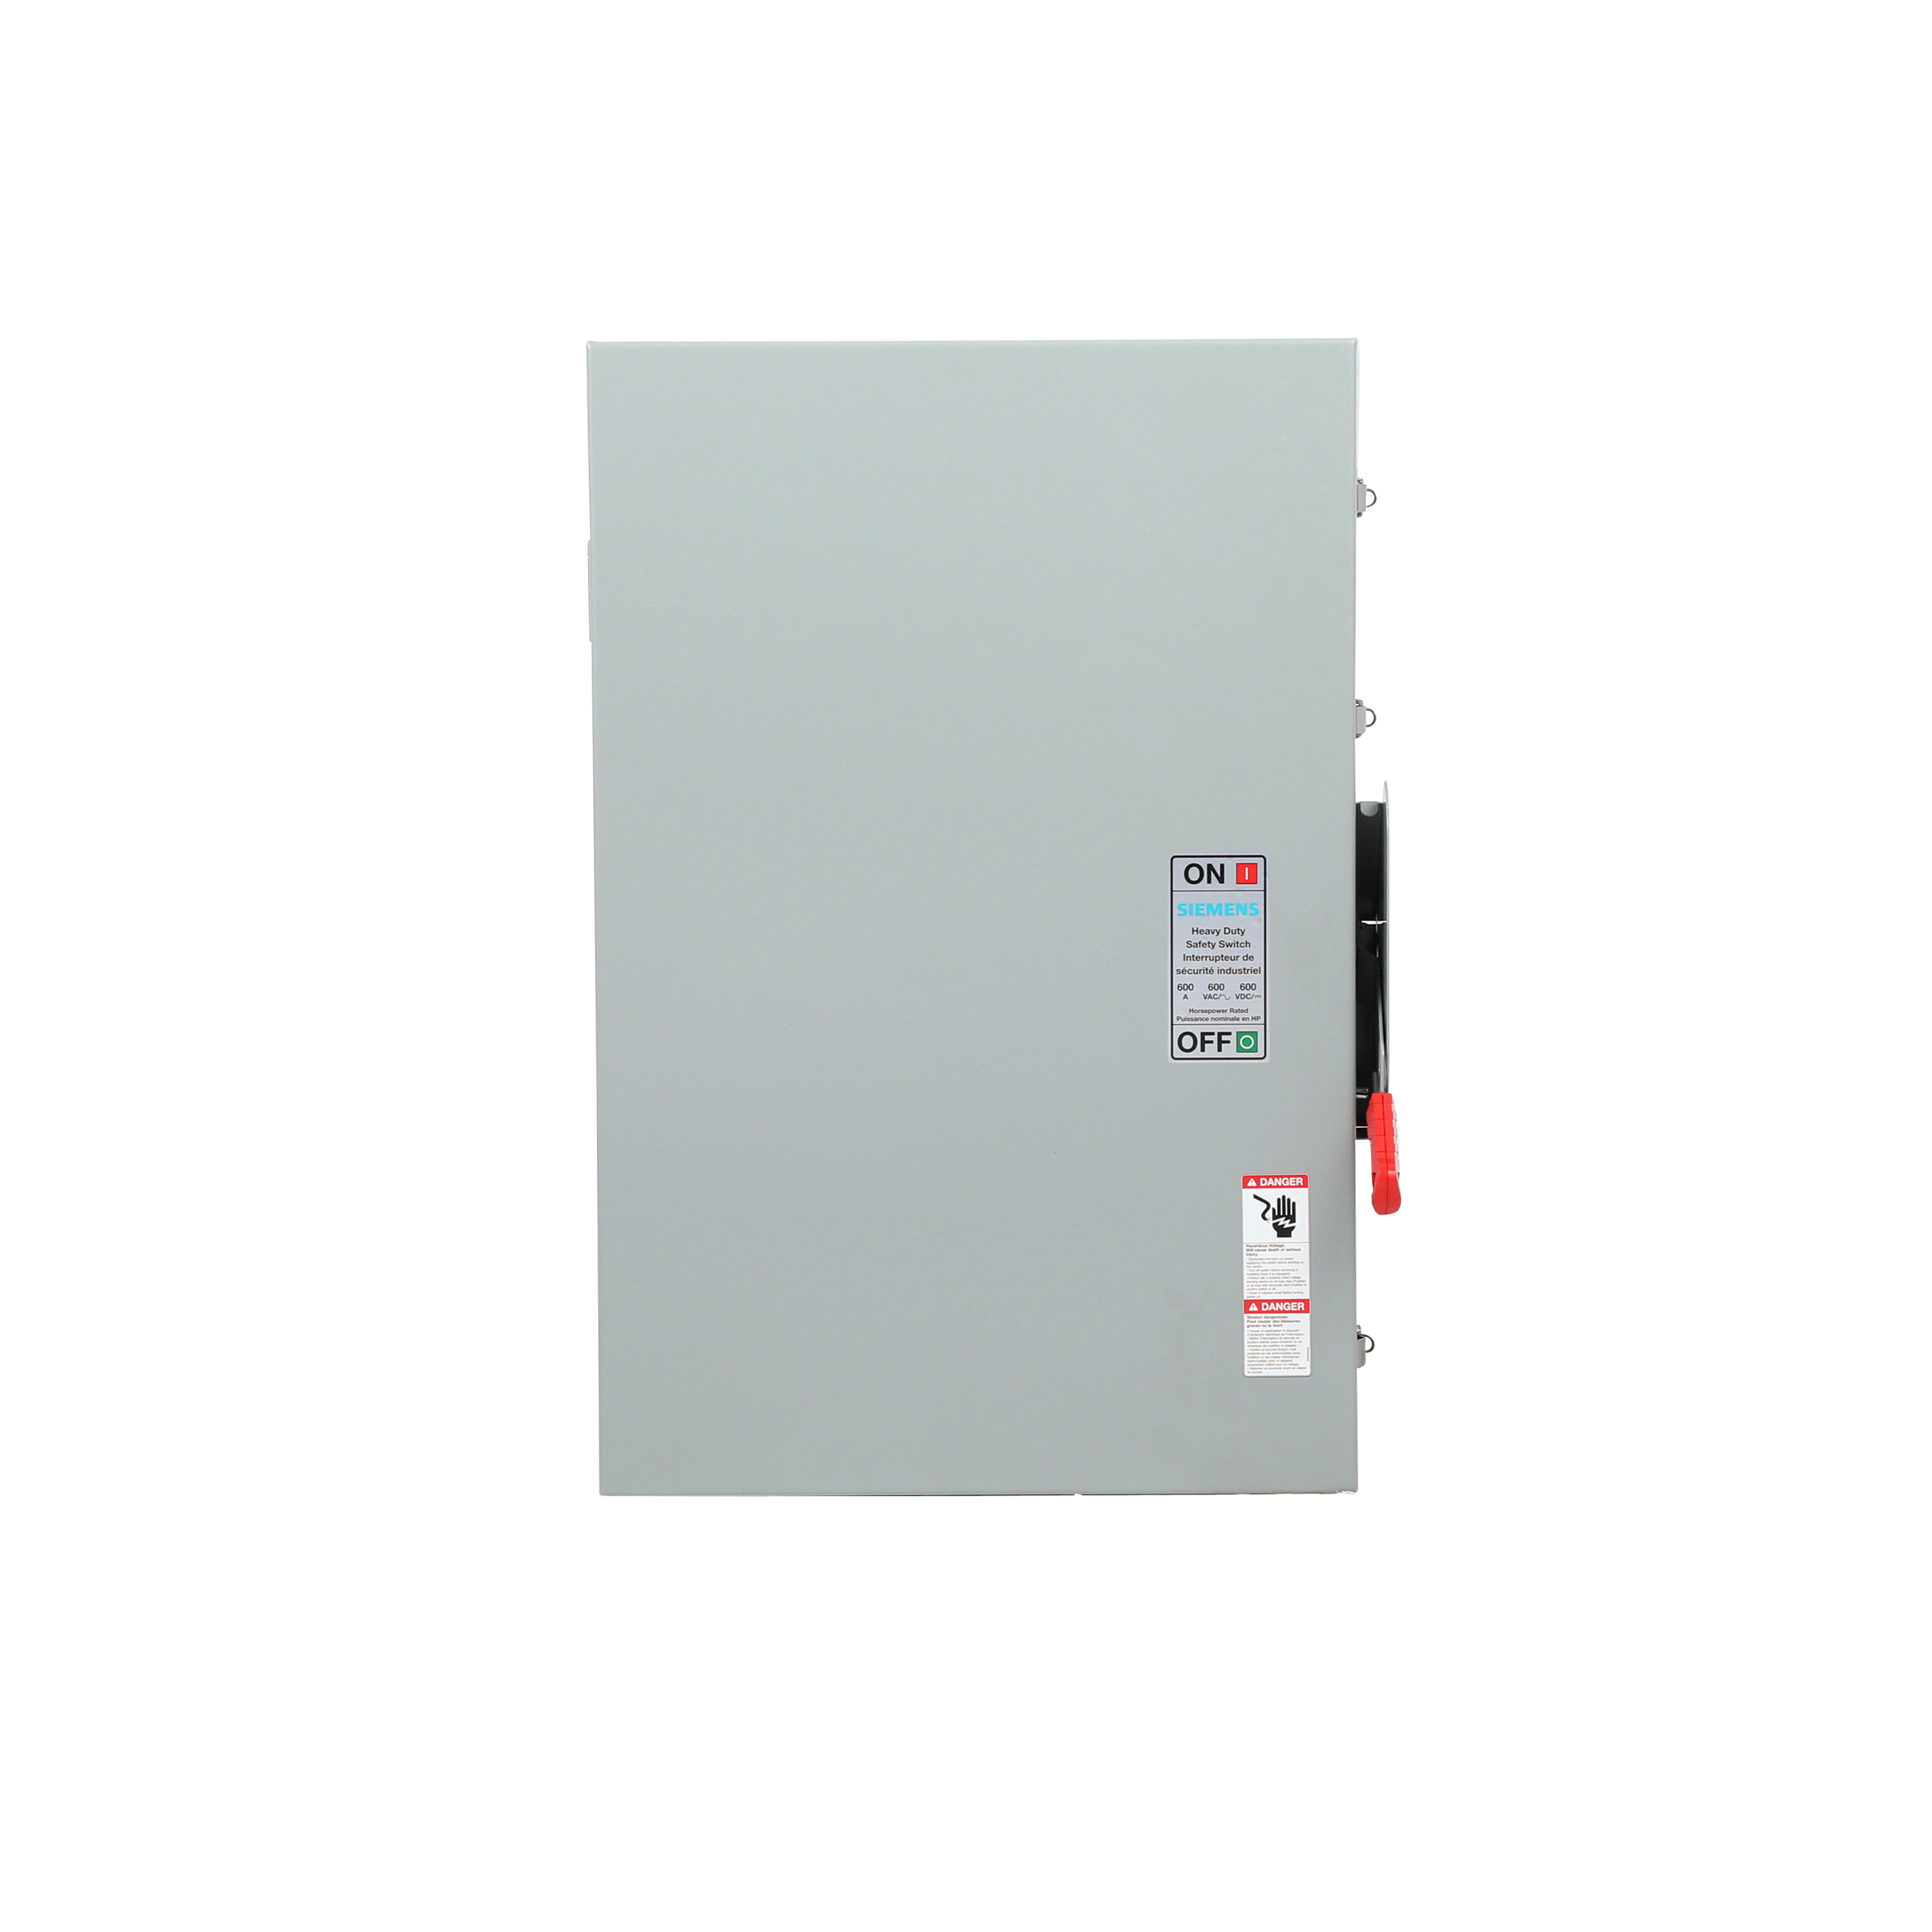 Siemens Low Voltage Circuit Protection Heavy Duty Safety Switch. 3-Pole Non-Fused in a type 12 industrial enclosure. Rated 600VAC (600A).